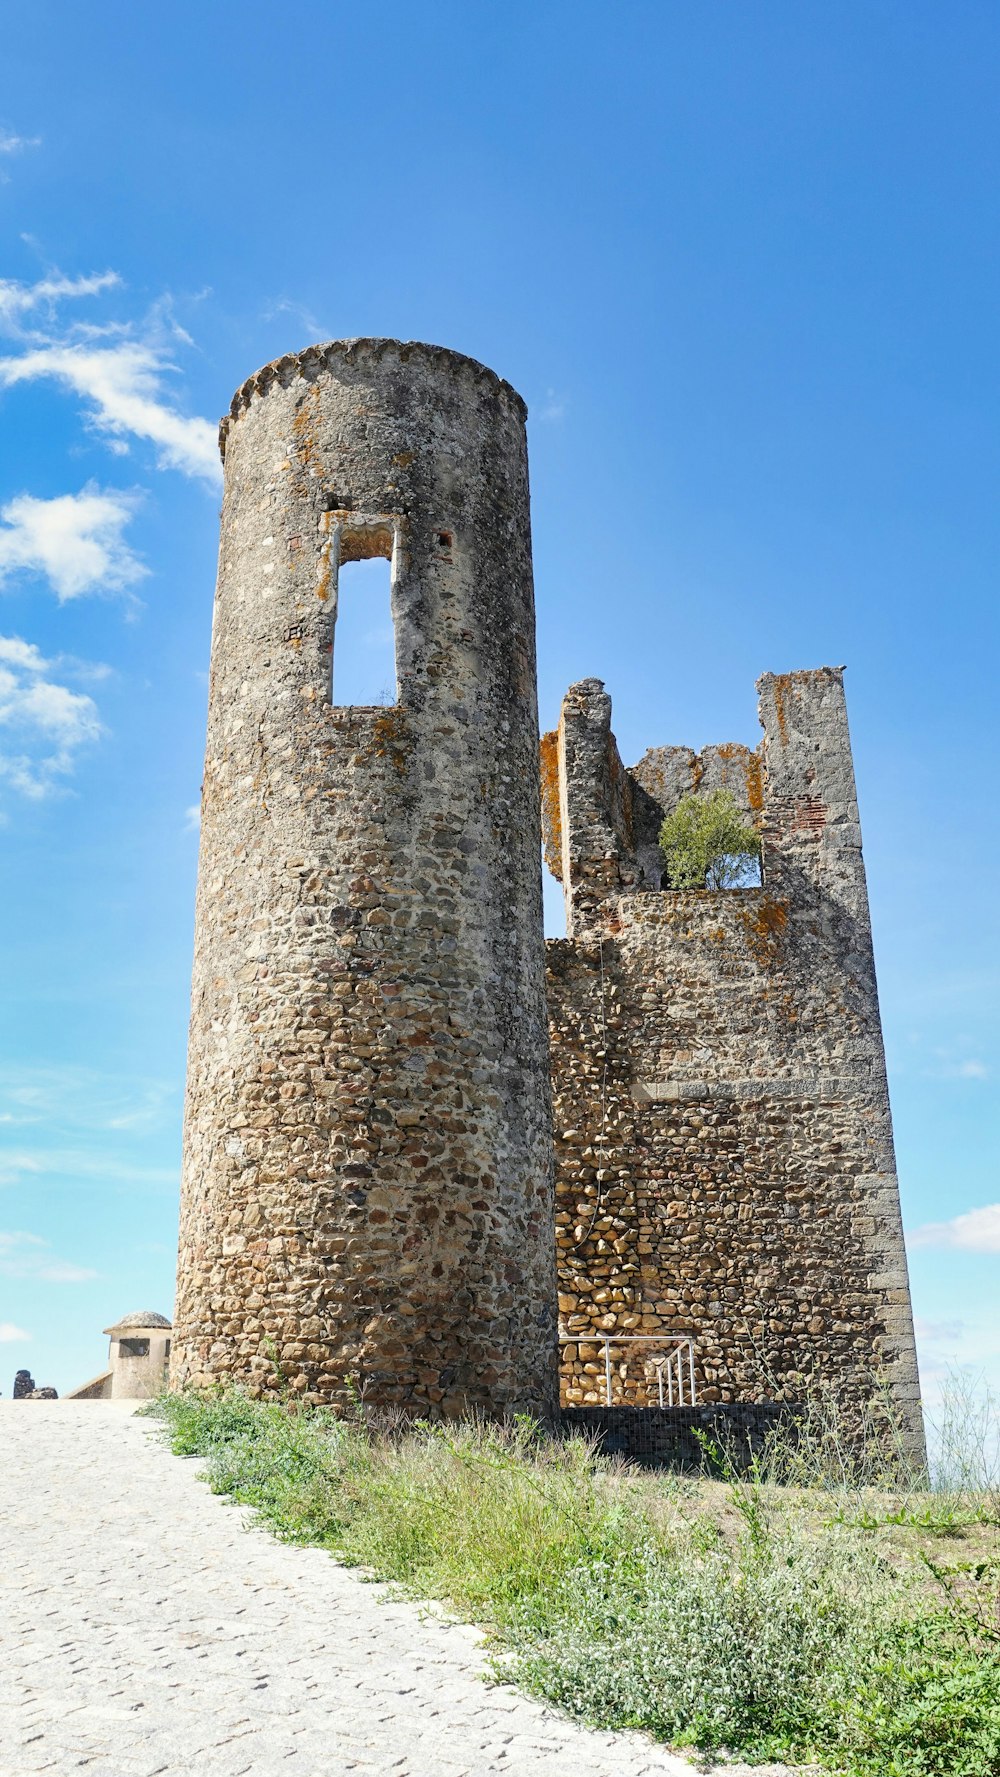 a stone tower with a window